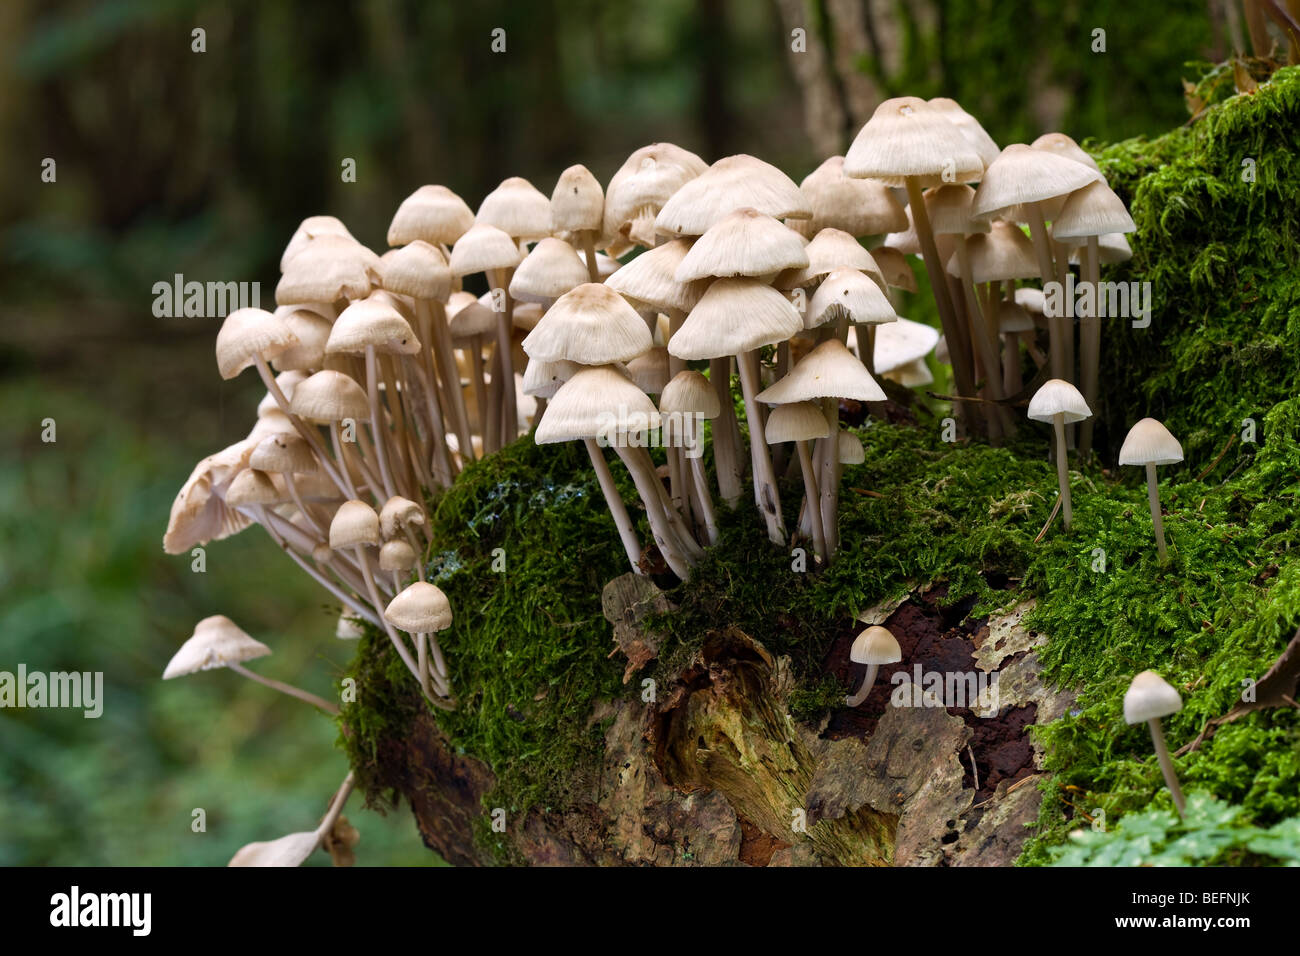 Toadstools growing on a tree stump in woodland Stock Photo